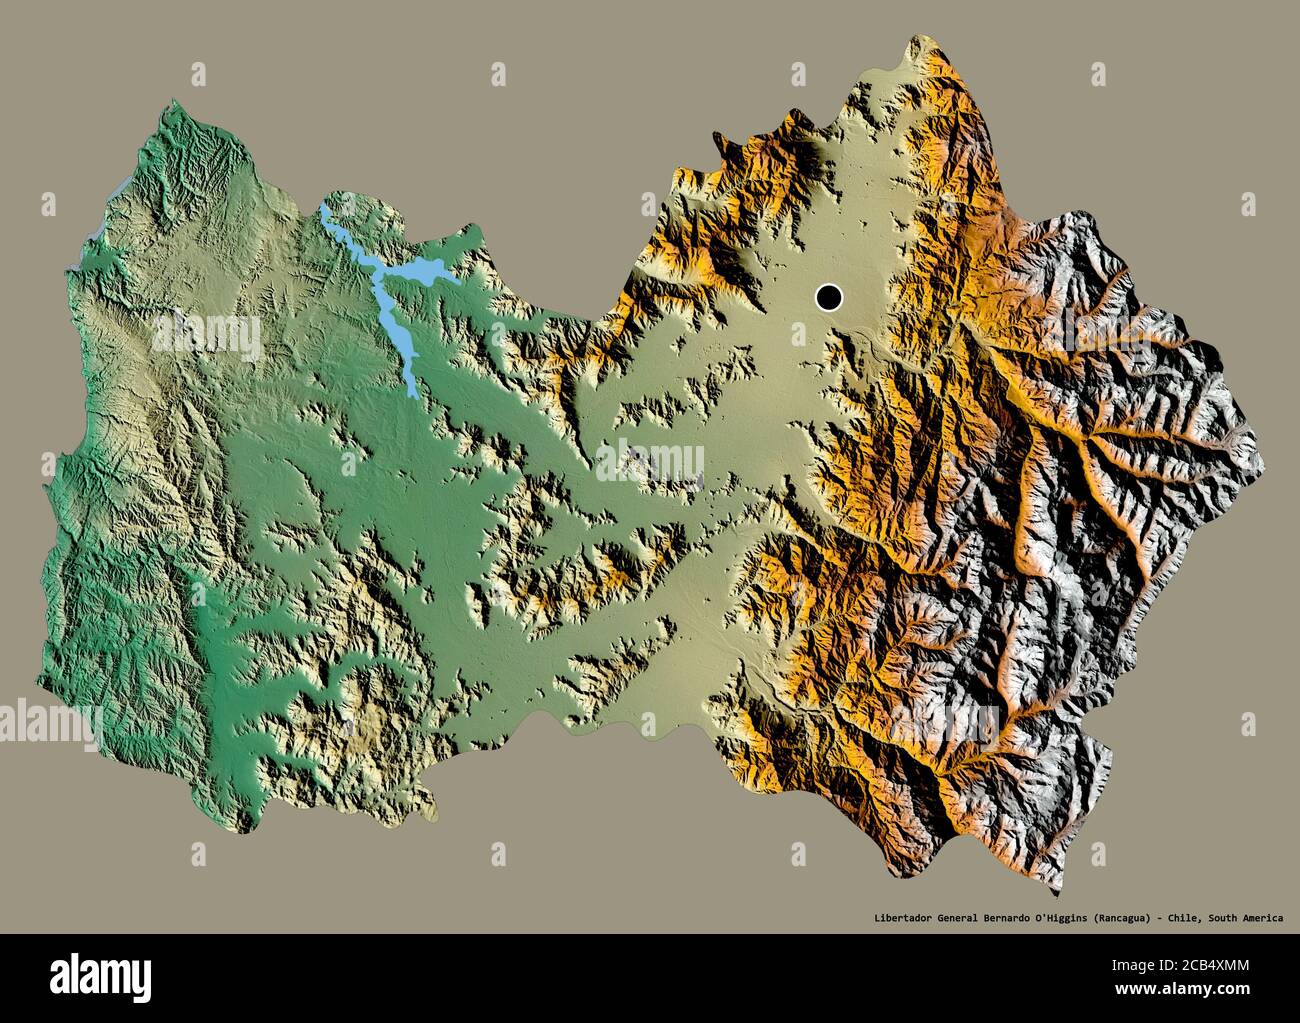 Shape of Libertador General Bernardo O'Higgins, region of Chile, with its capital isolated on a solid color background. Topographic relief map. 3D ren Stock Photo